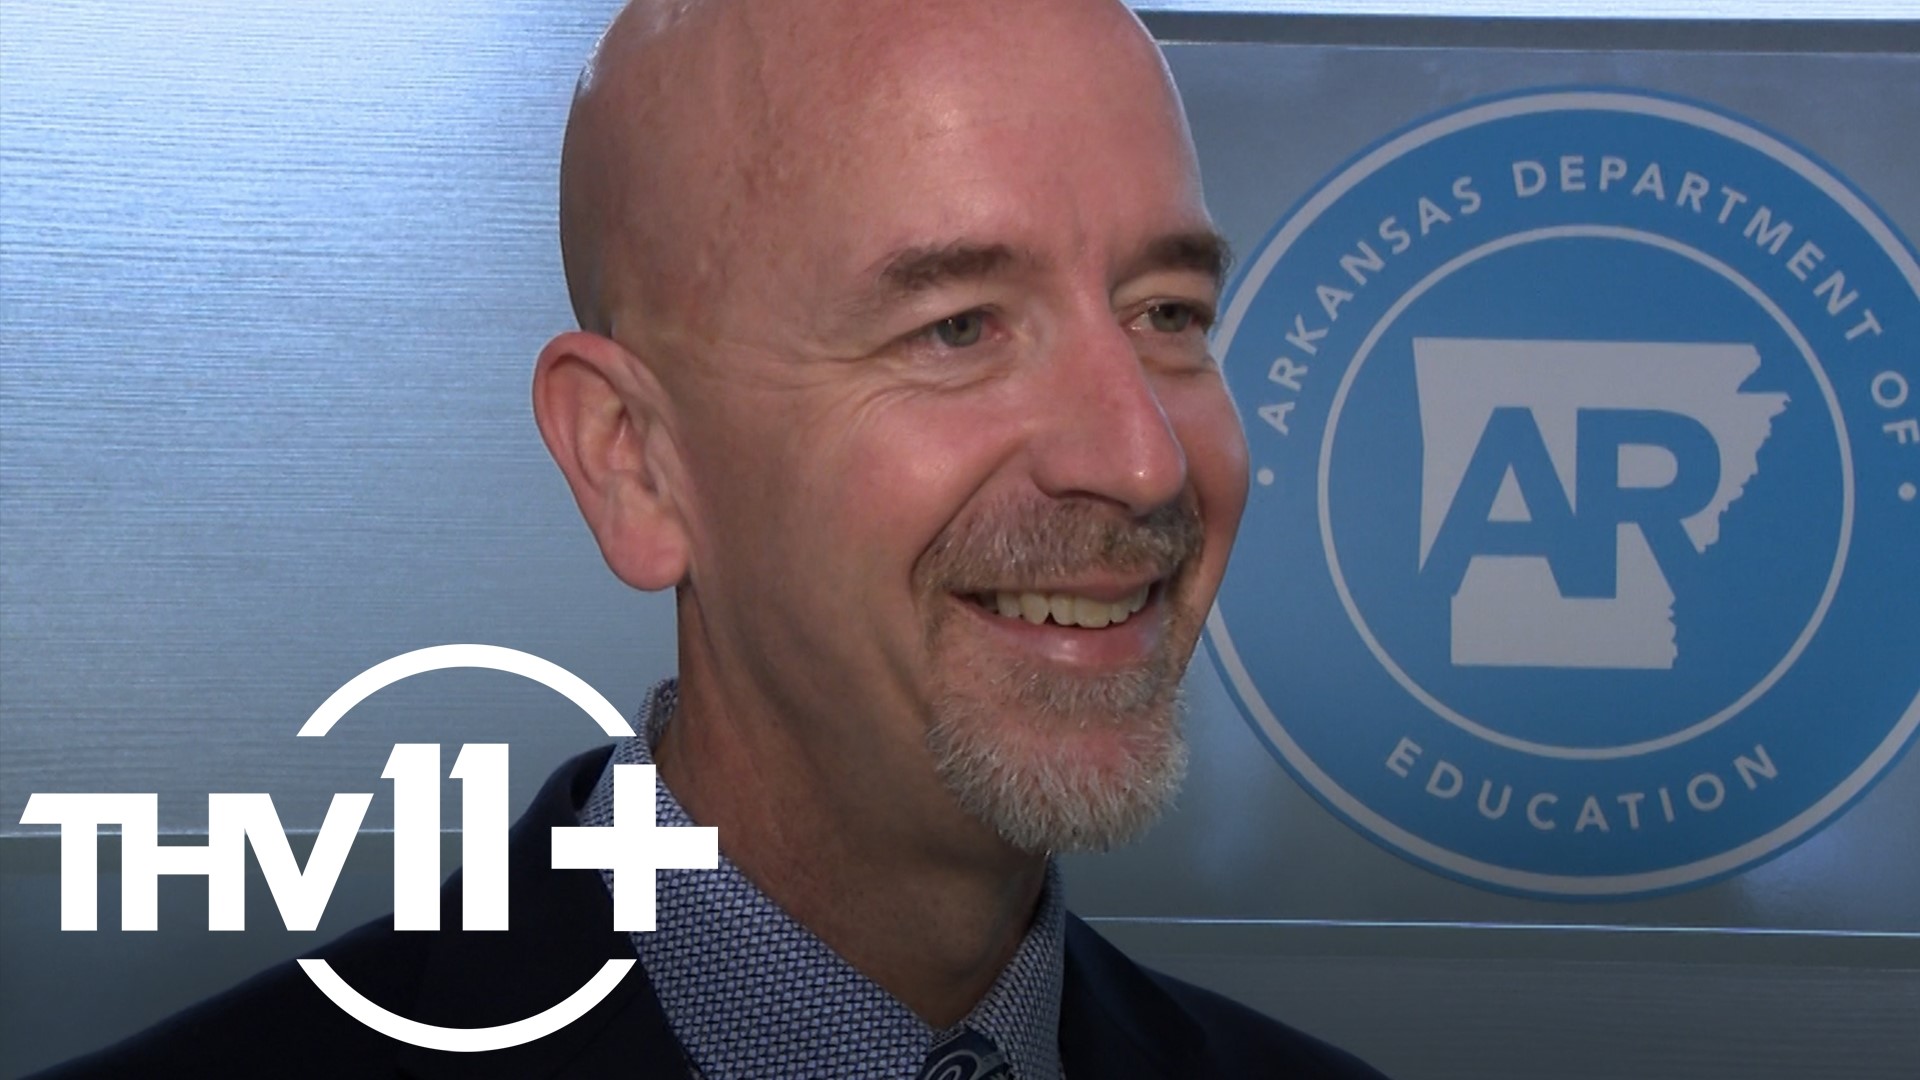 Jacob Oliva, Arkansas's education secretary, spoke with us about what he hopes to accomplish and answered questions about an executive order regarding CRT in schools